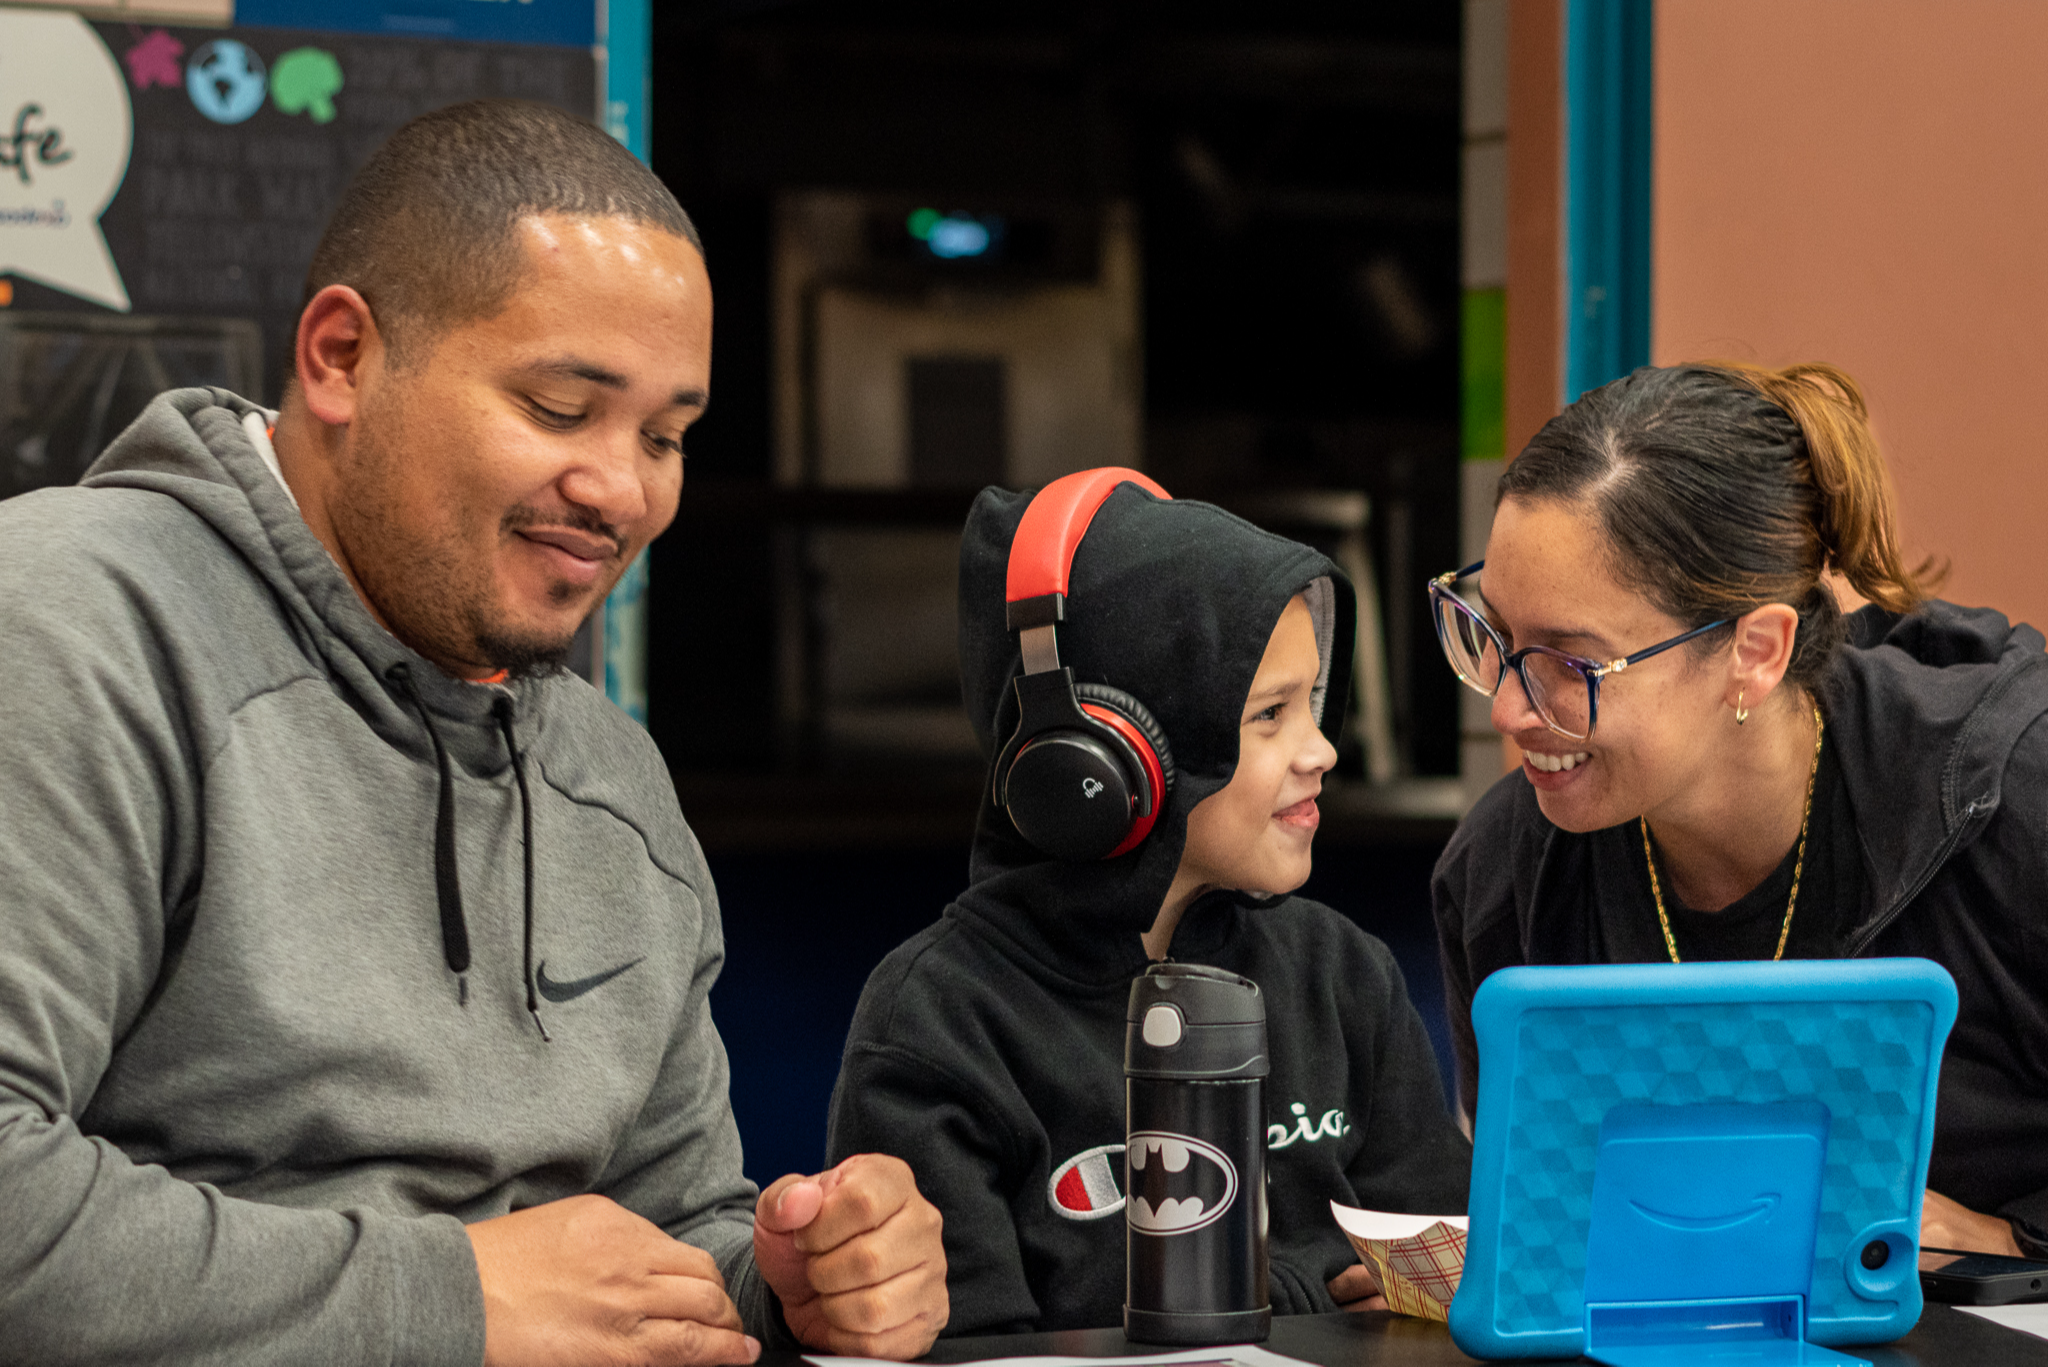 woman smiling at child wearing headphones in front of tablet while man looks on